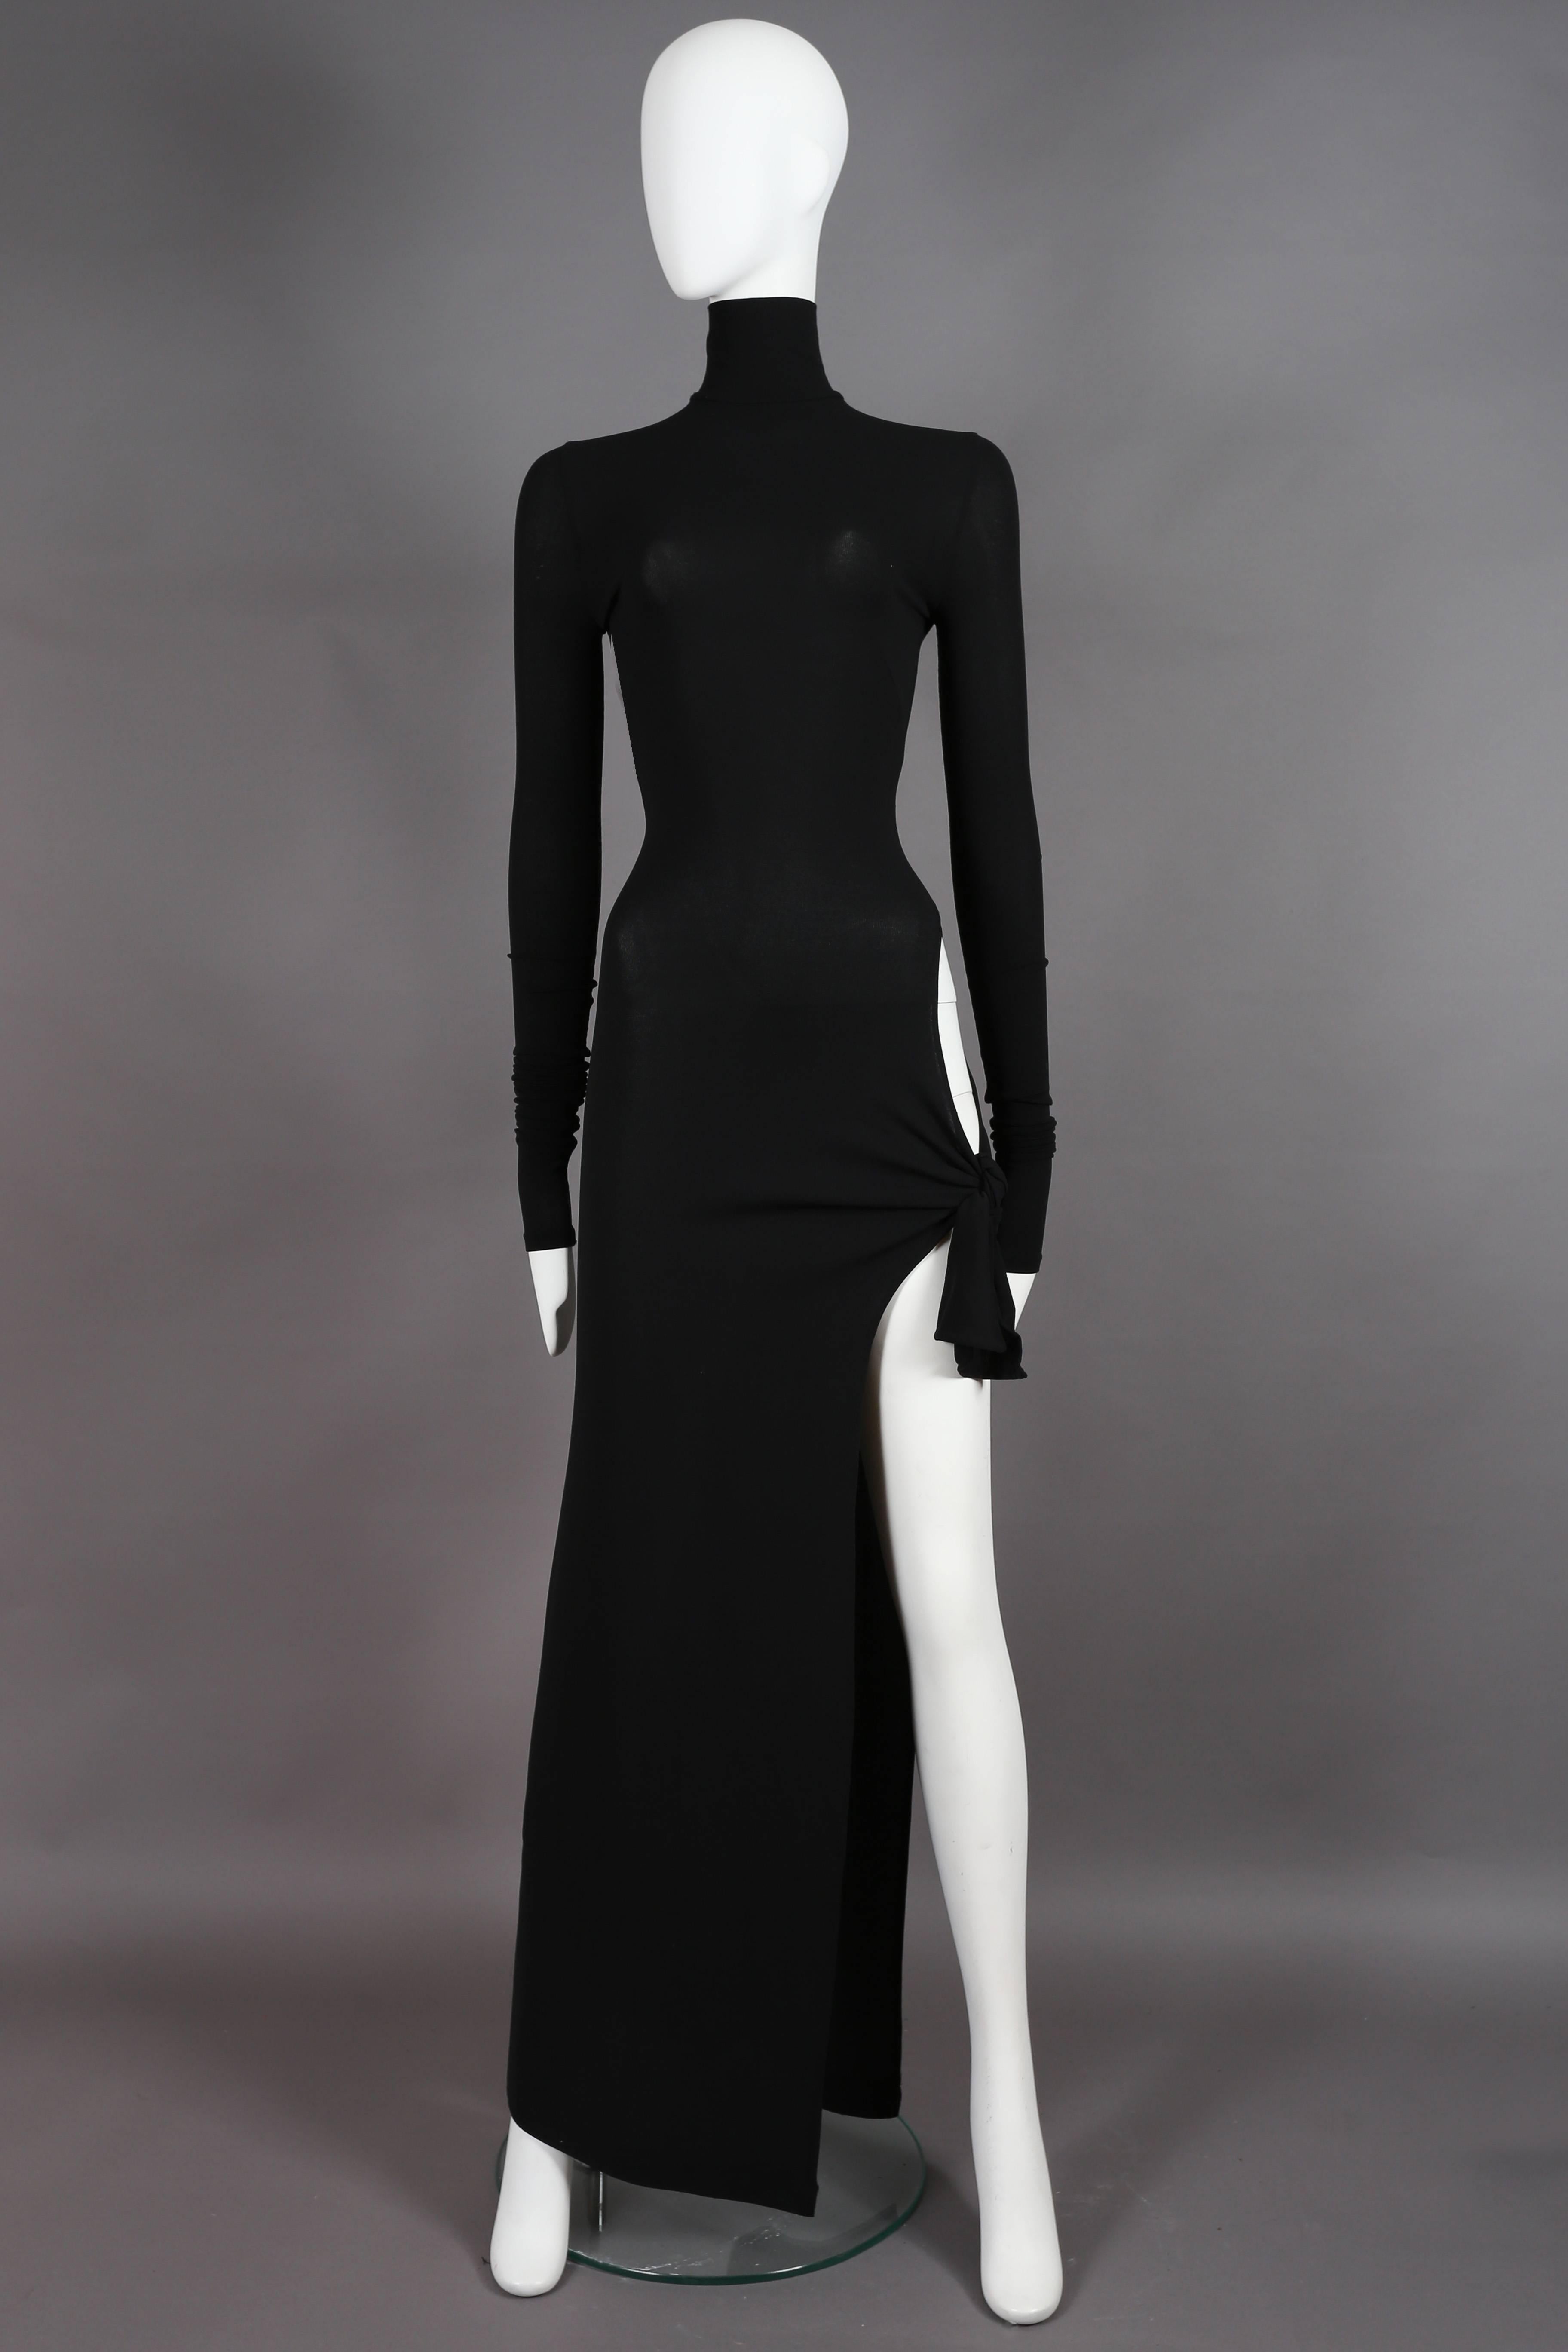 An iconic and rare Dolce & Gabbana bodycon evening dress from the spring summer 2001 collection. Black spandex-like stretch fabric, turtleneck, long fitted sleeves, invisible zip closure, high leg slit and circular cut on the lower hip with tie-up